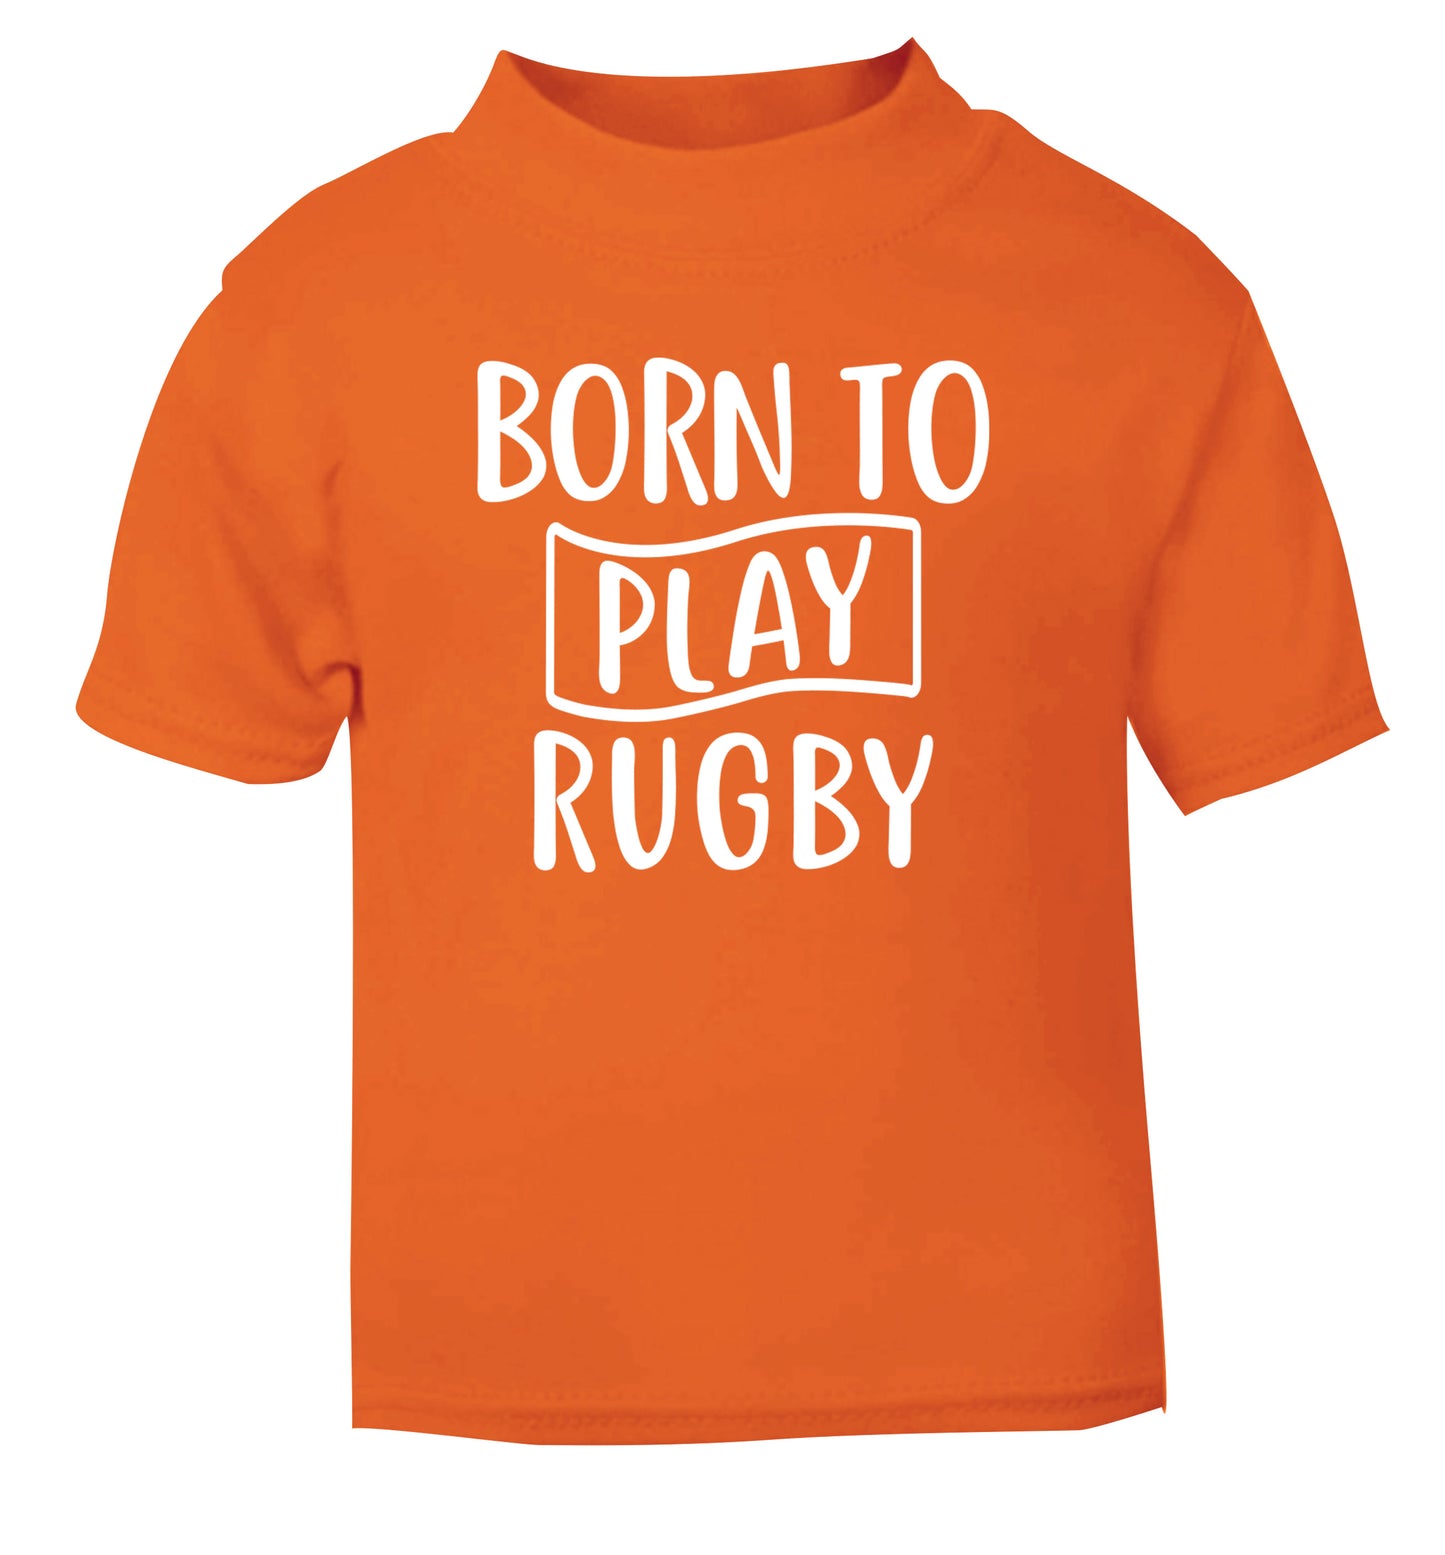 Born to play rugby orange Baby Toddler Tshirt 2 Years